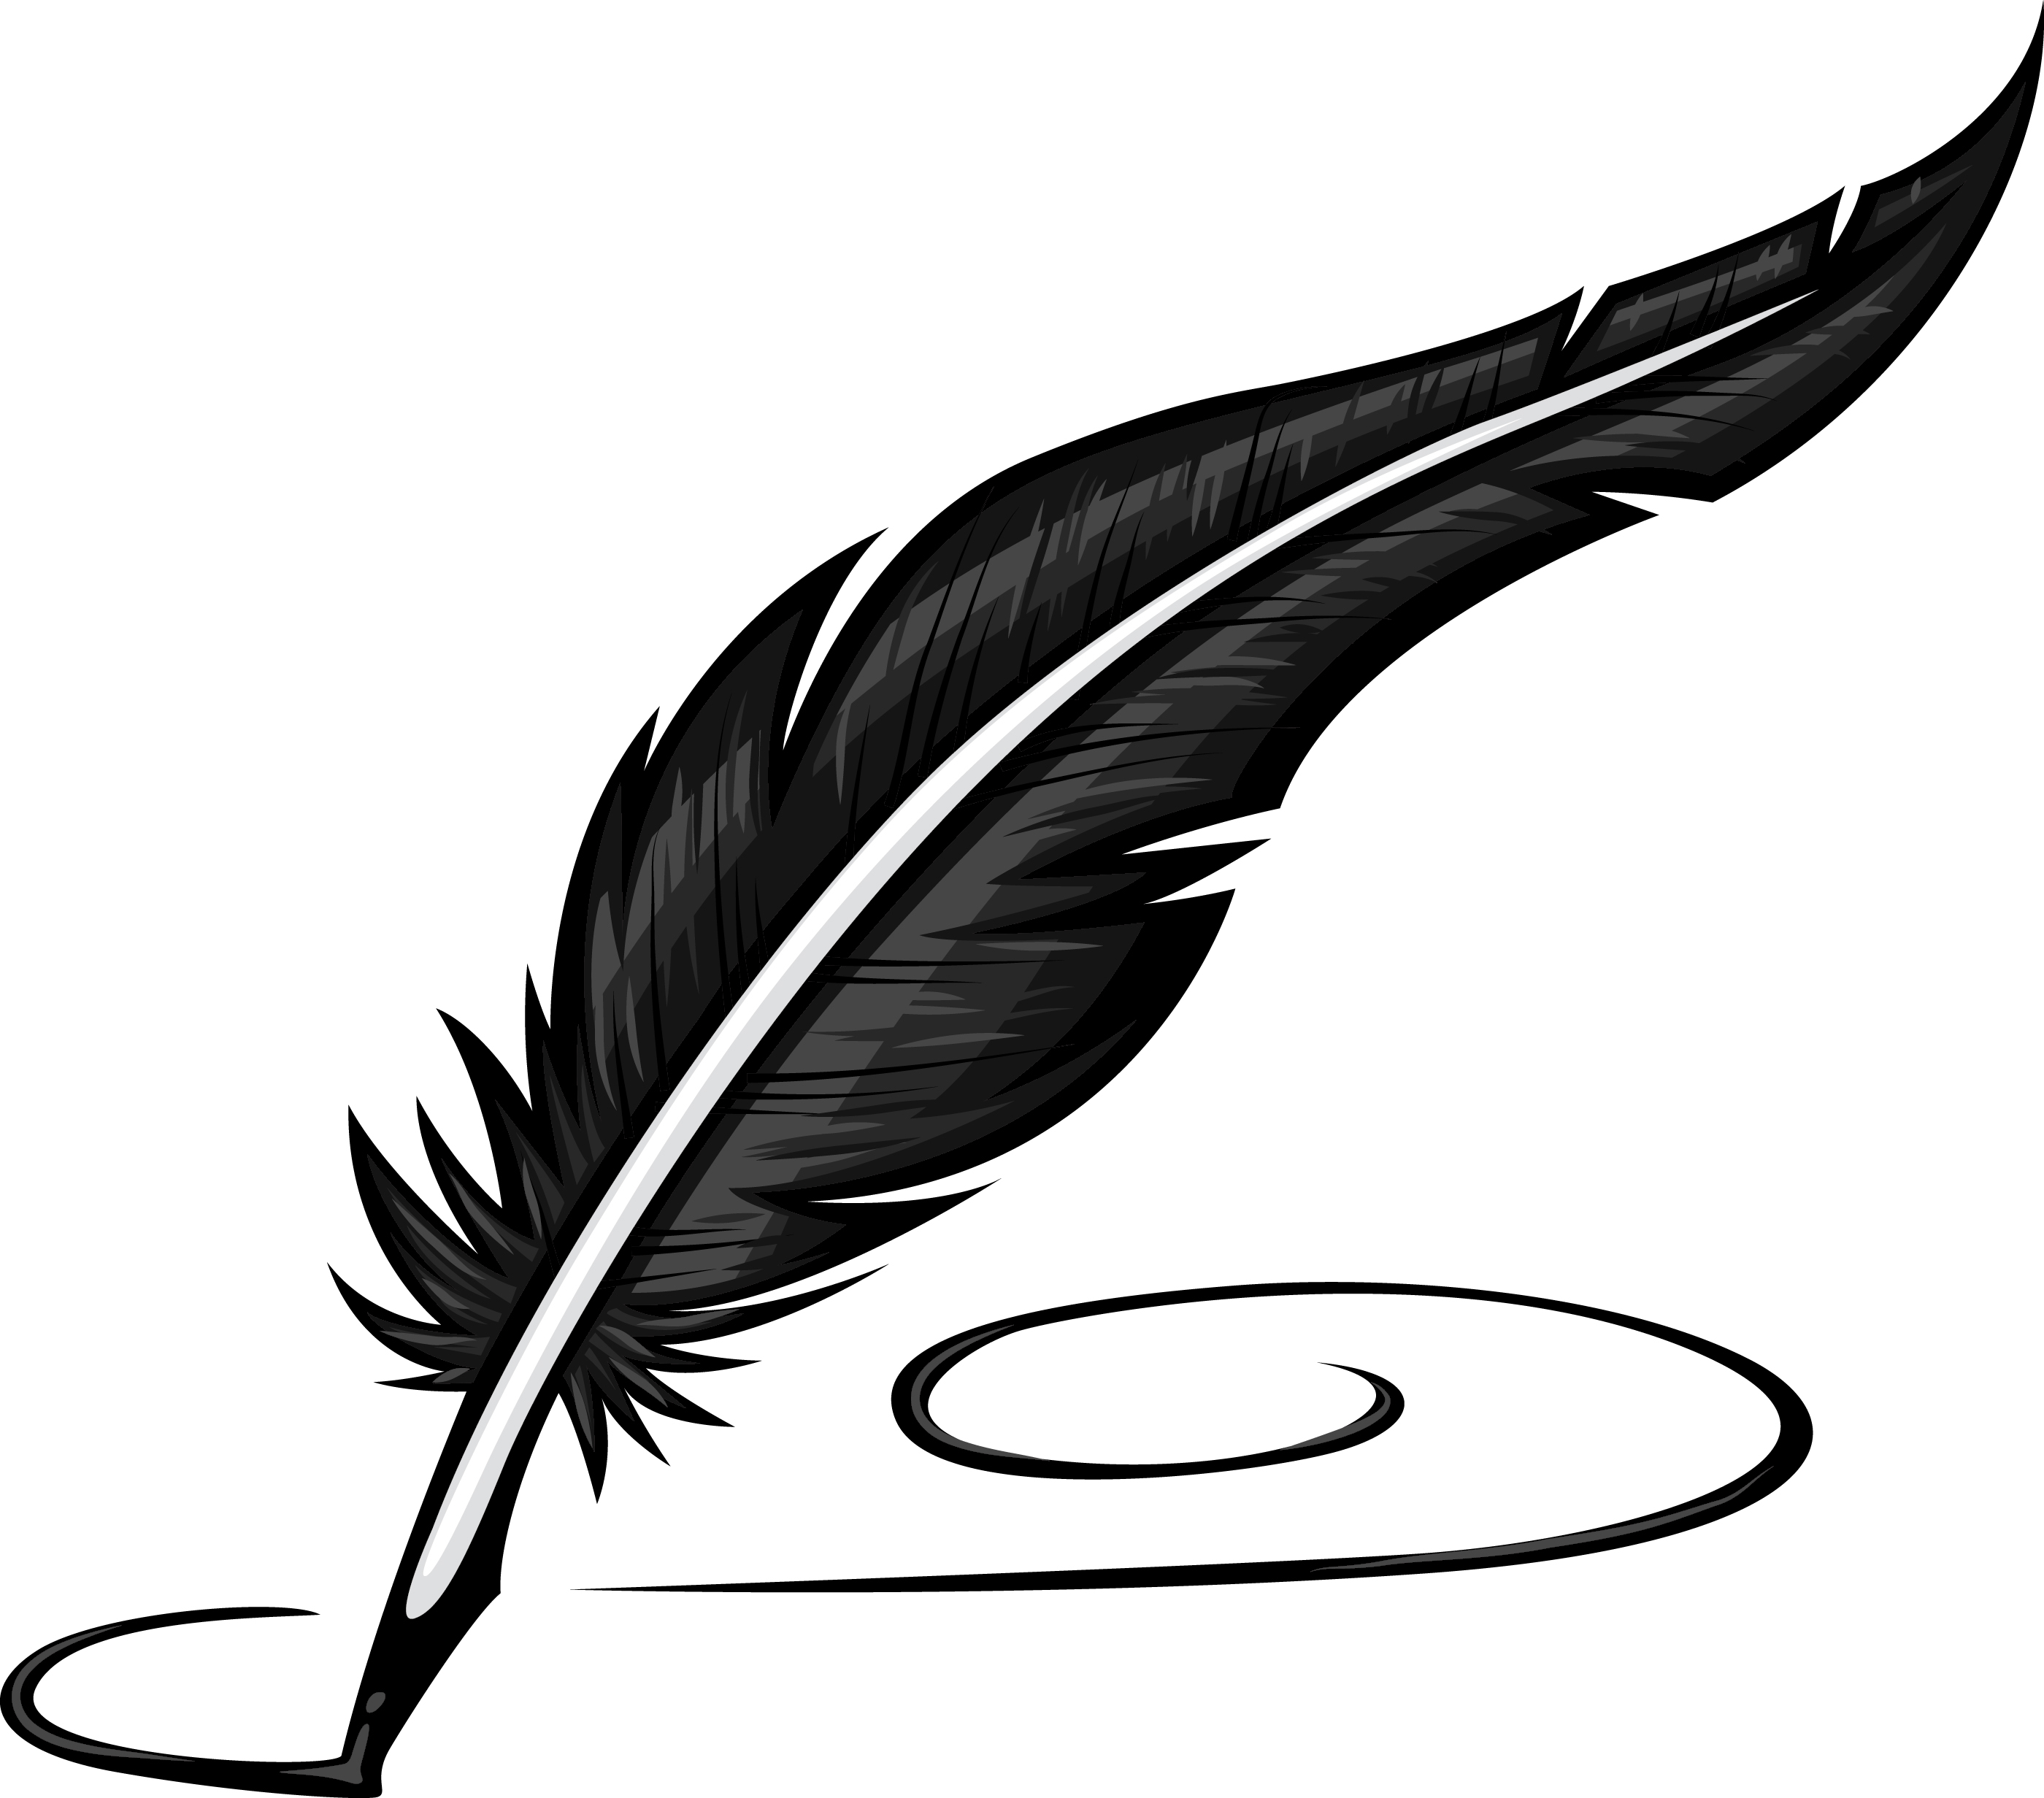 Quill.png - ClipArt Best